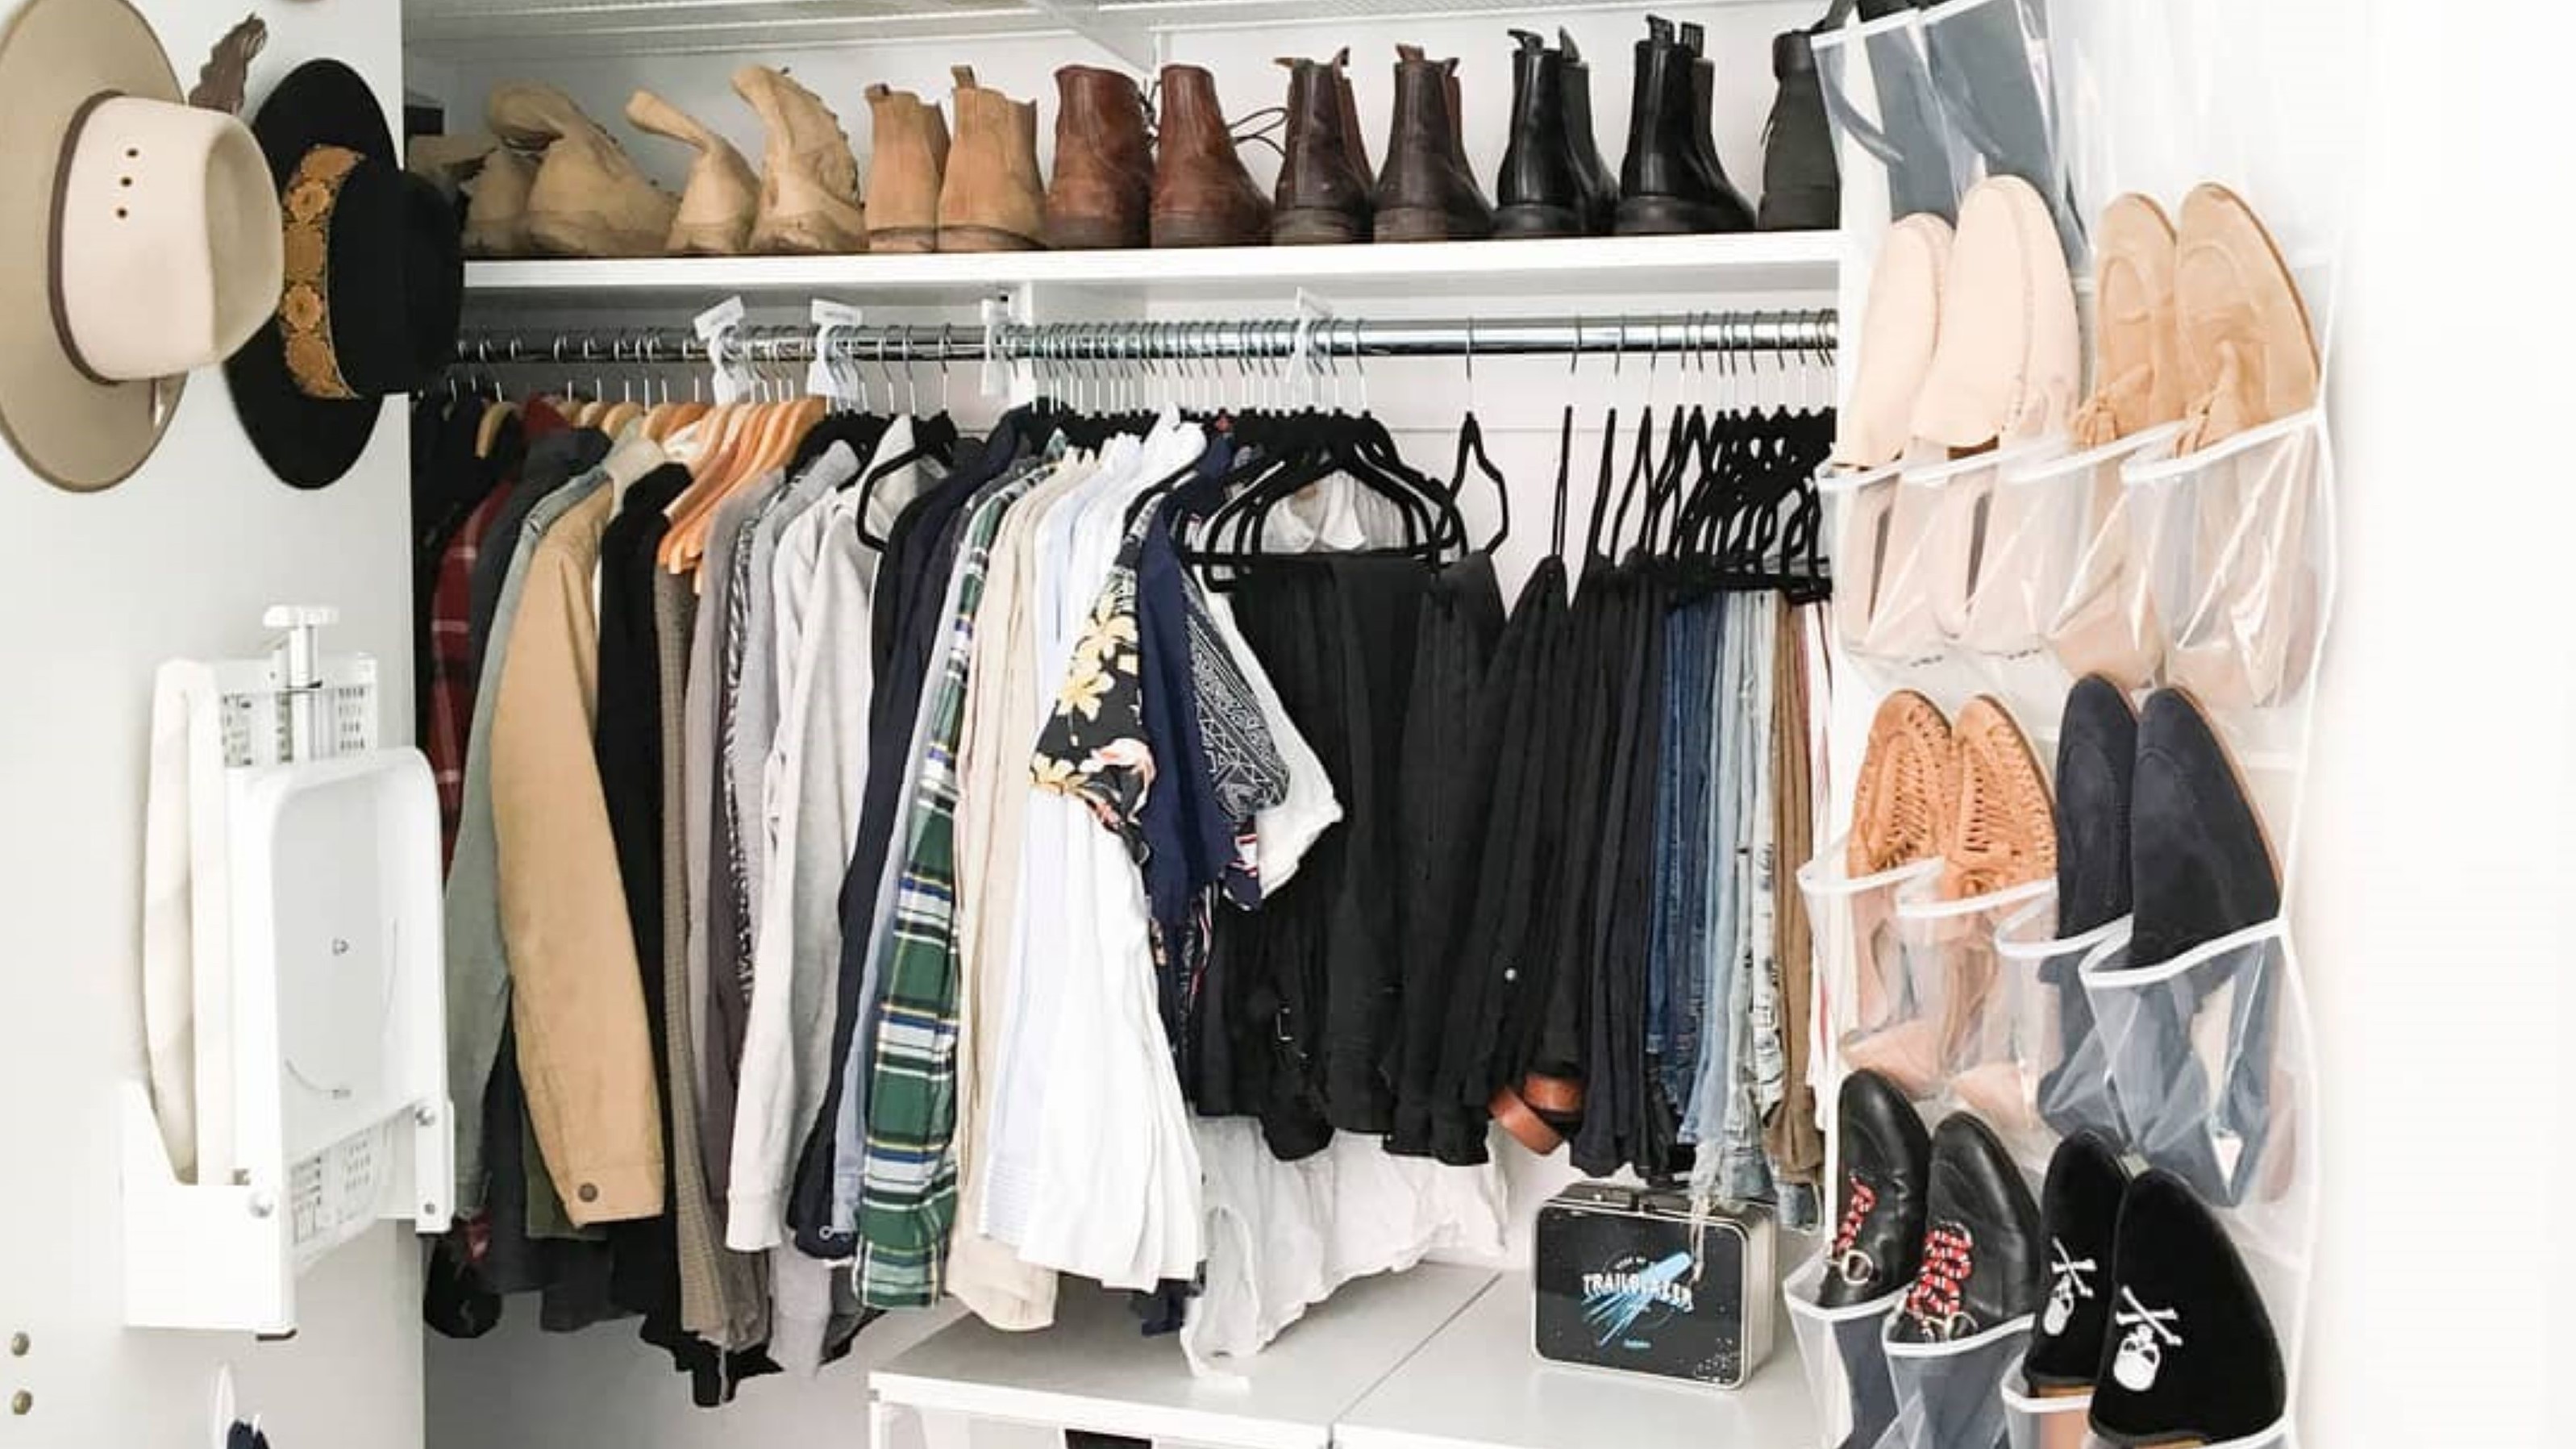 Top 10 Products to Organize Your Closet - Horderly